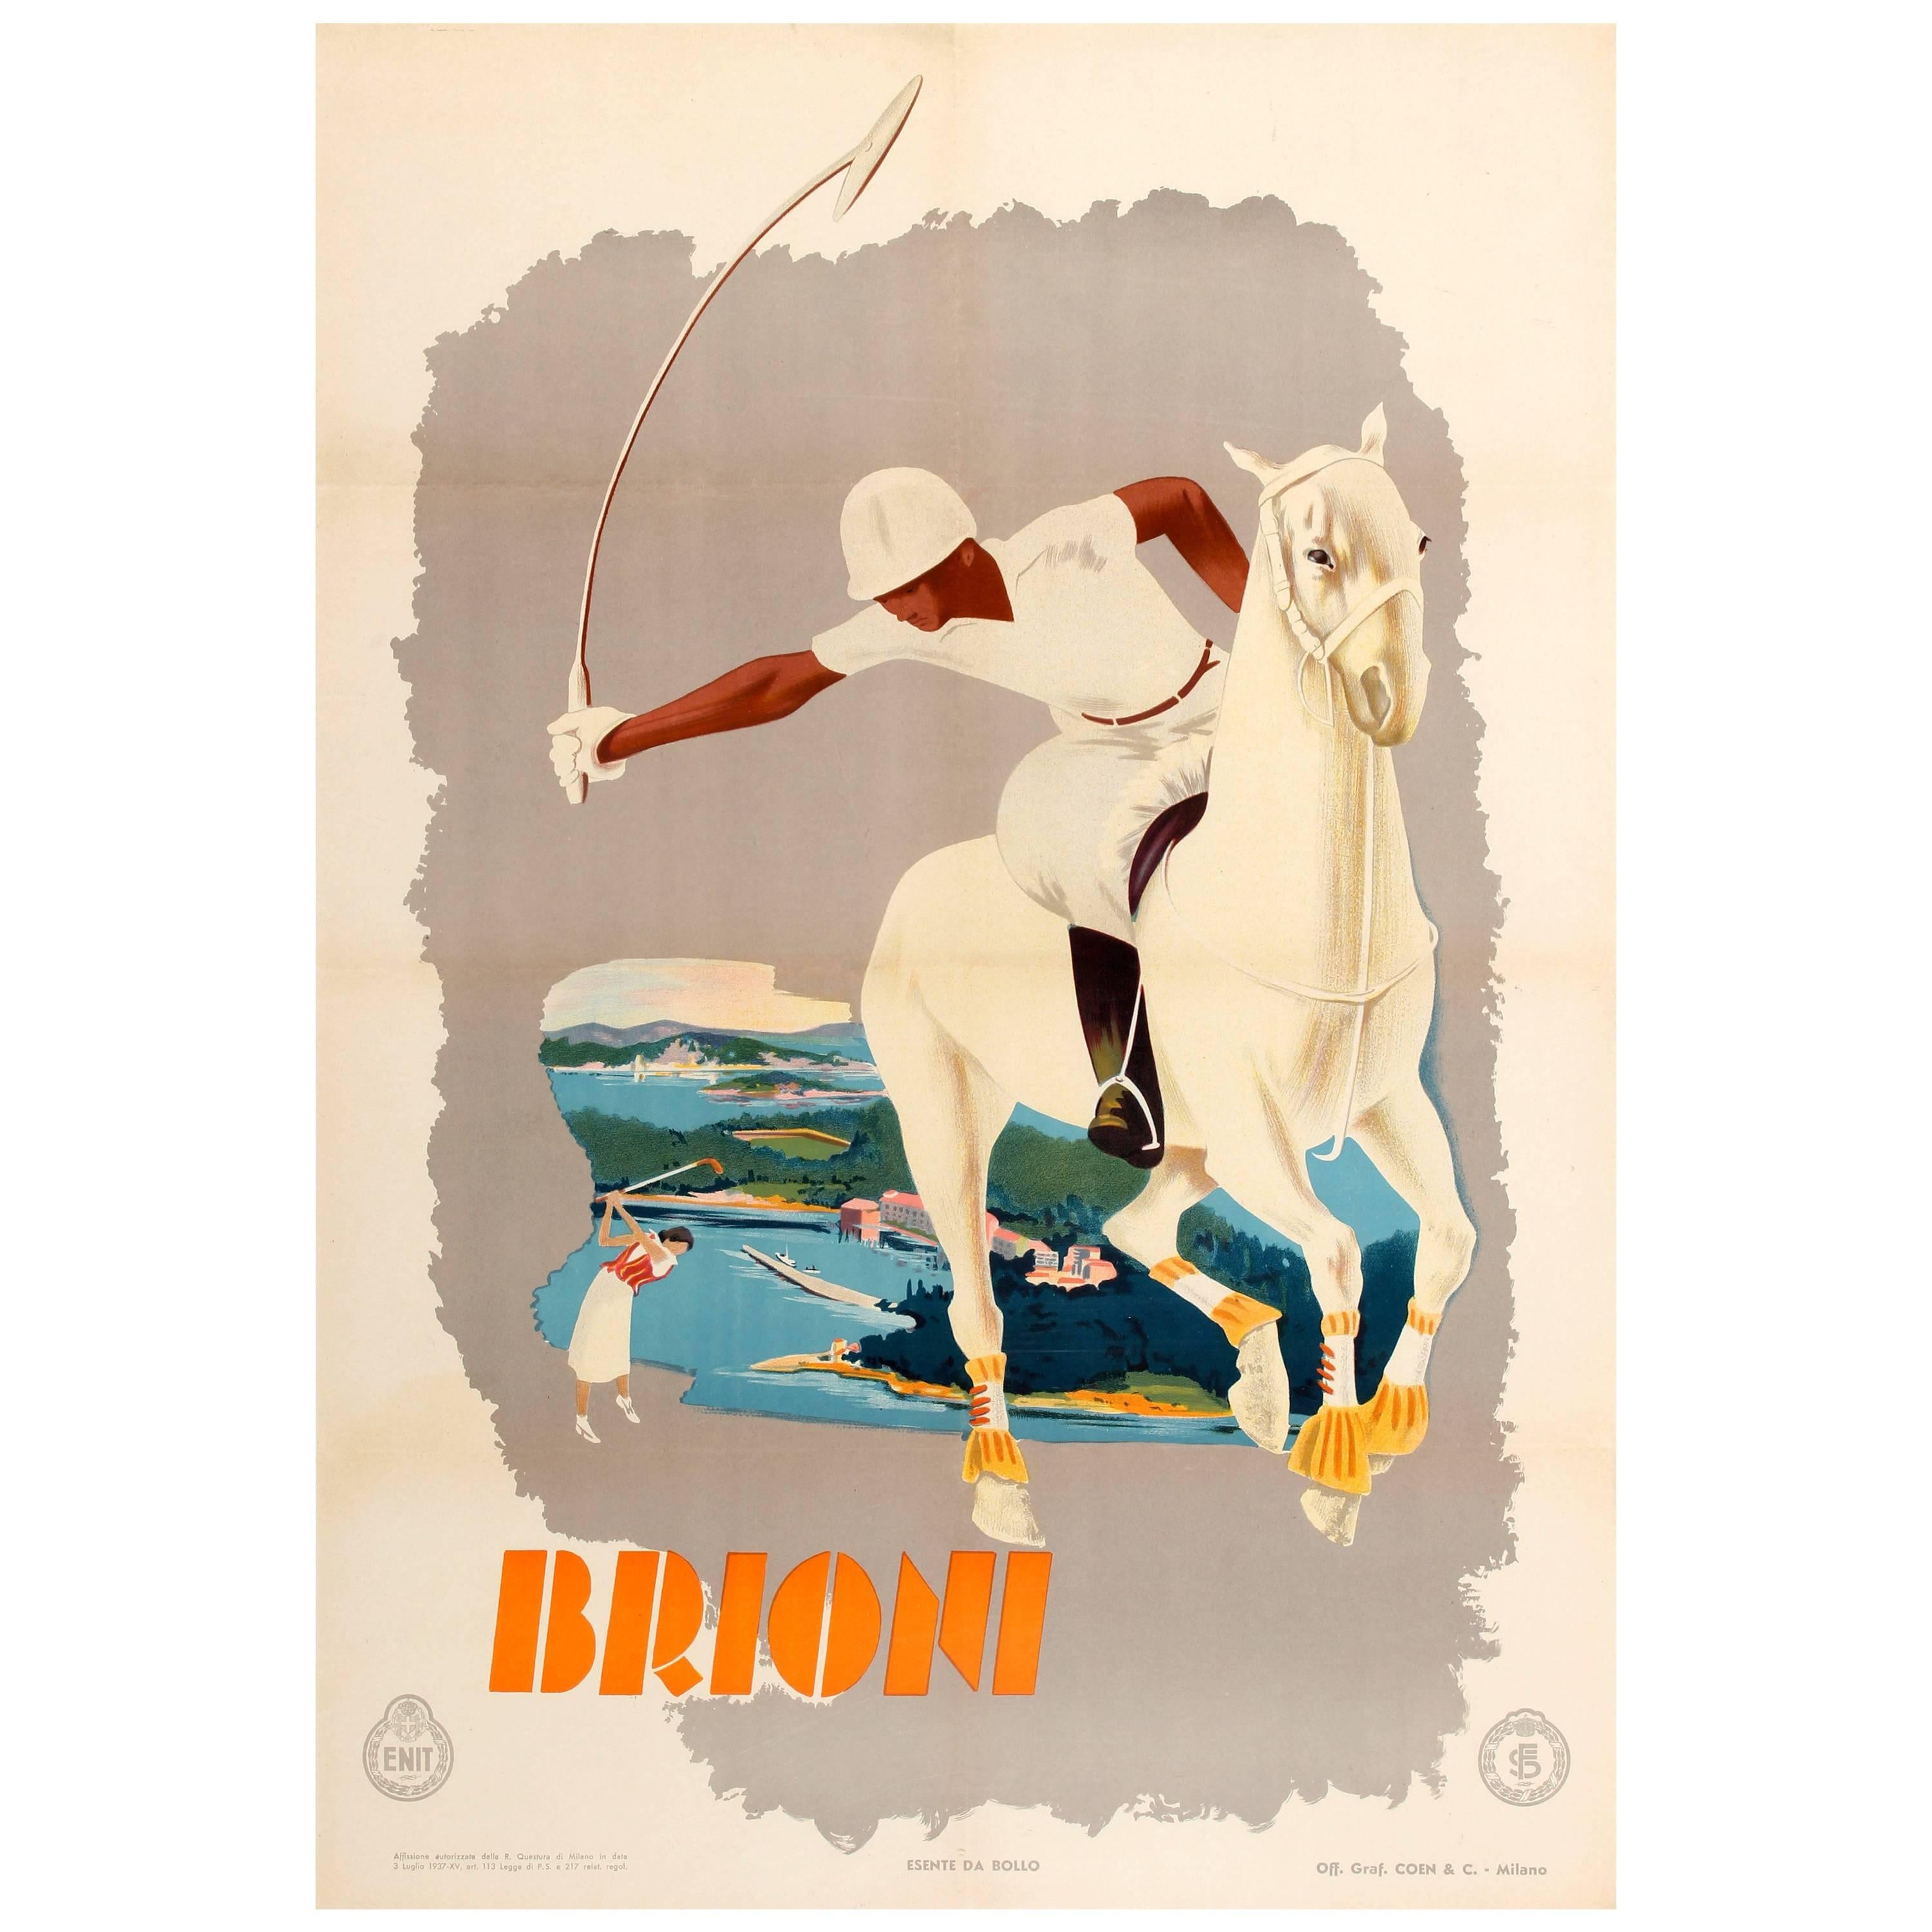 Original Vintage Enit Art Deco Poster for Briony Brijuni Featuring Polo and Golf